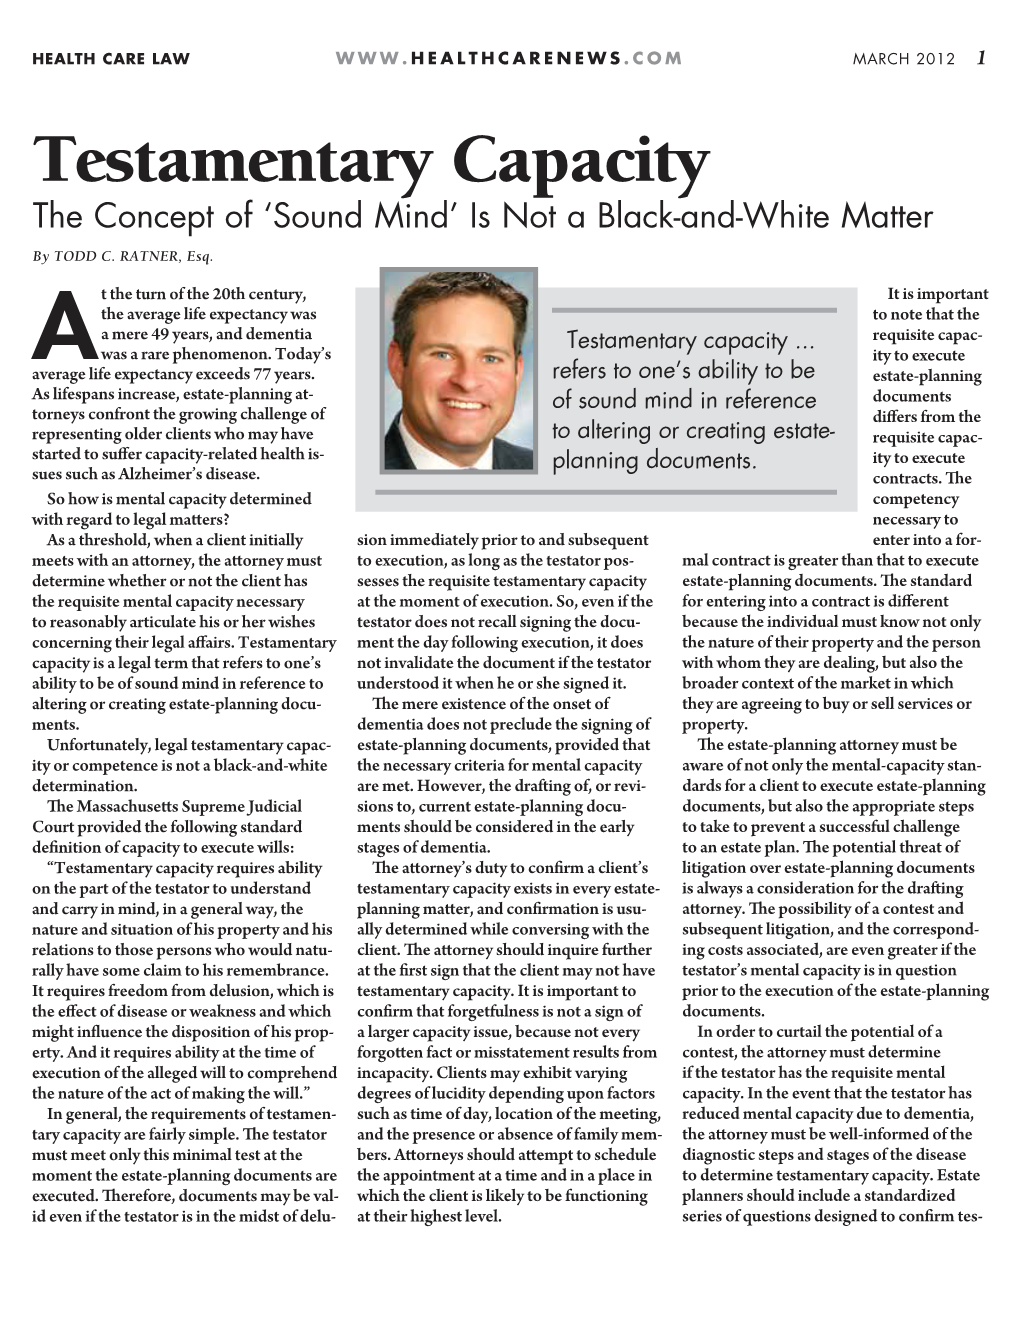 Testamentary Capacity the Concept of ‘Sound Mind’ Is Not a Black-And-White Matter by TODD C